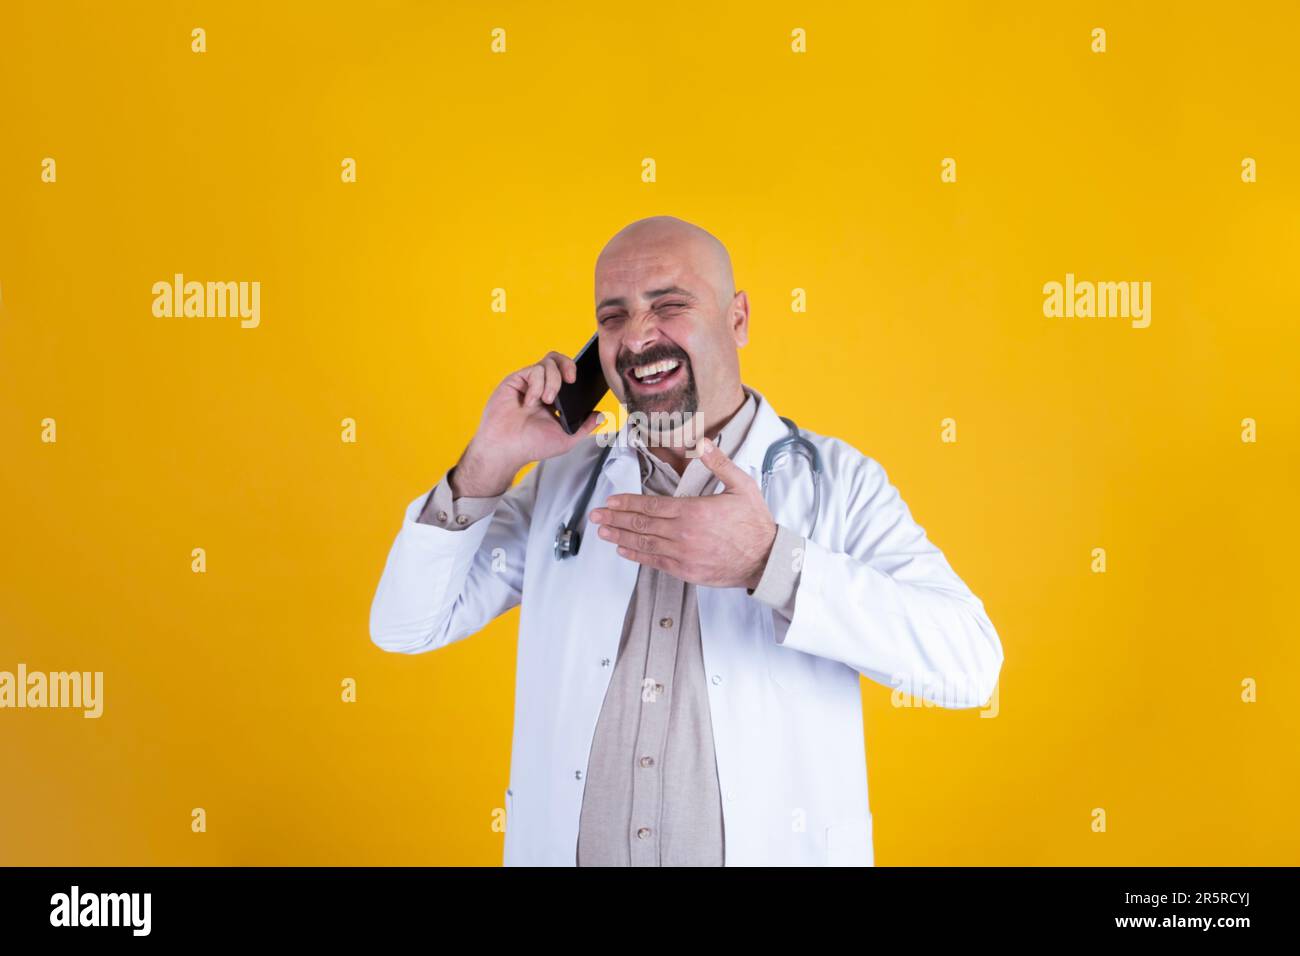 Bald caucasian male doctor talking on the phone. Happy physician wearing hospital uniform, stethoscope. Lol. Speaking with friend, cheerful face. Stock Photo